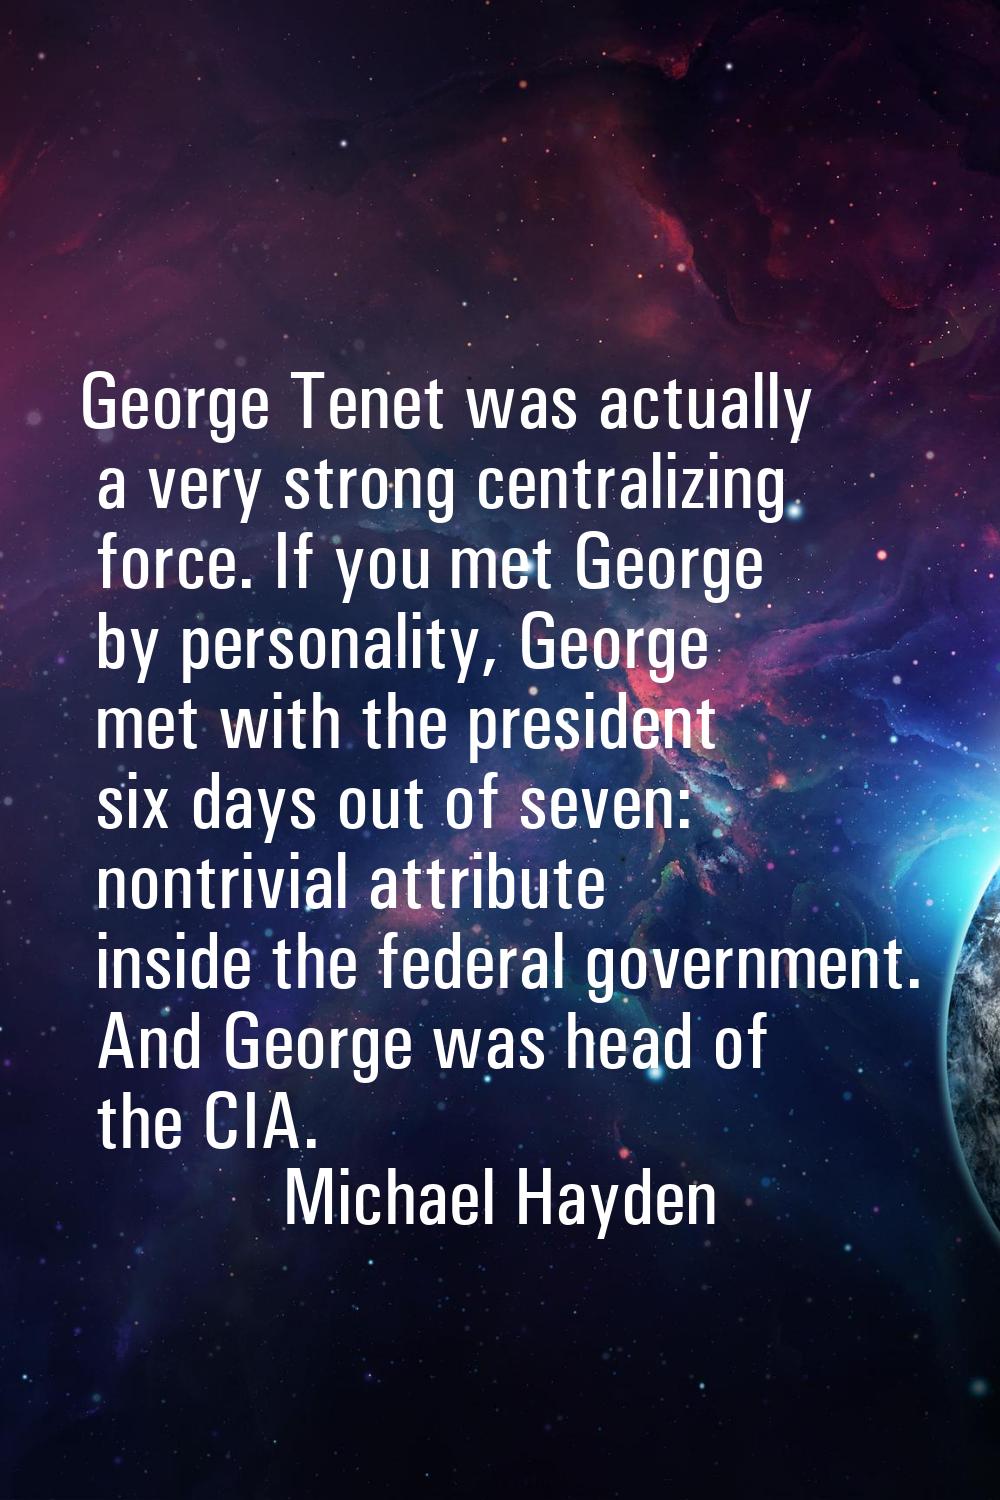 George Tenet was actually a very strong centralizing force. If you met George by personality, Georg